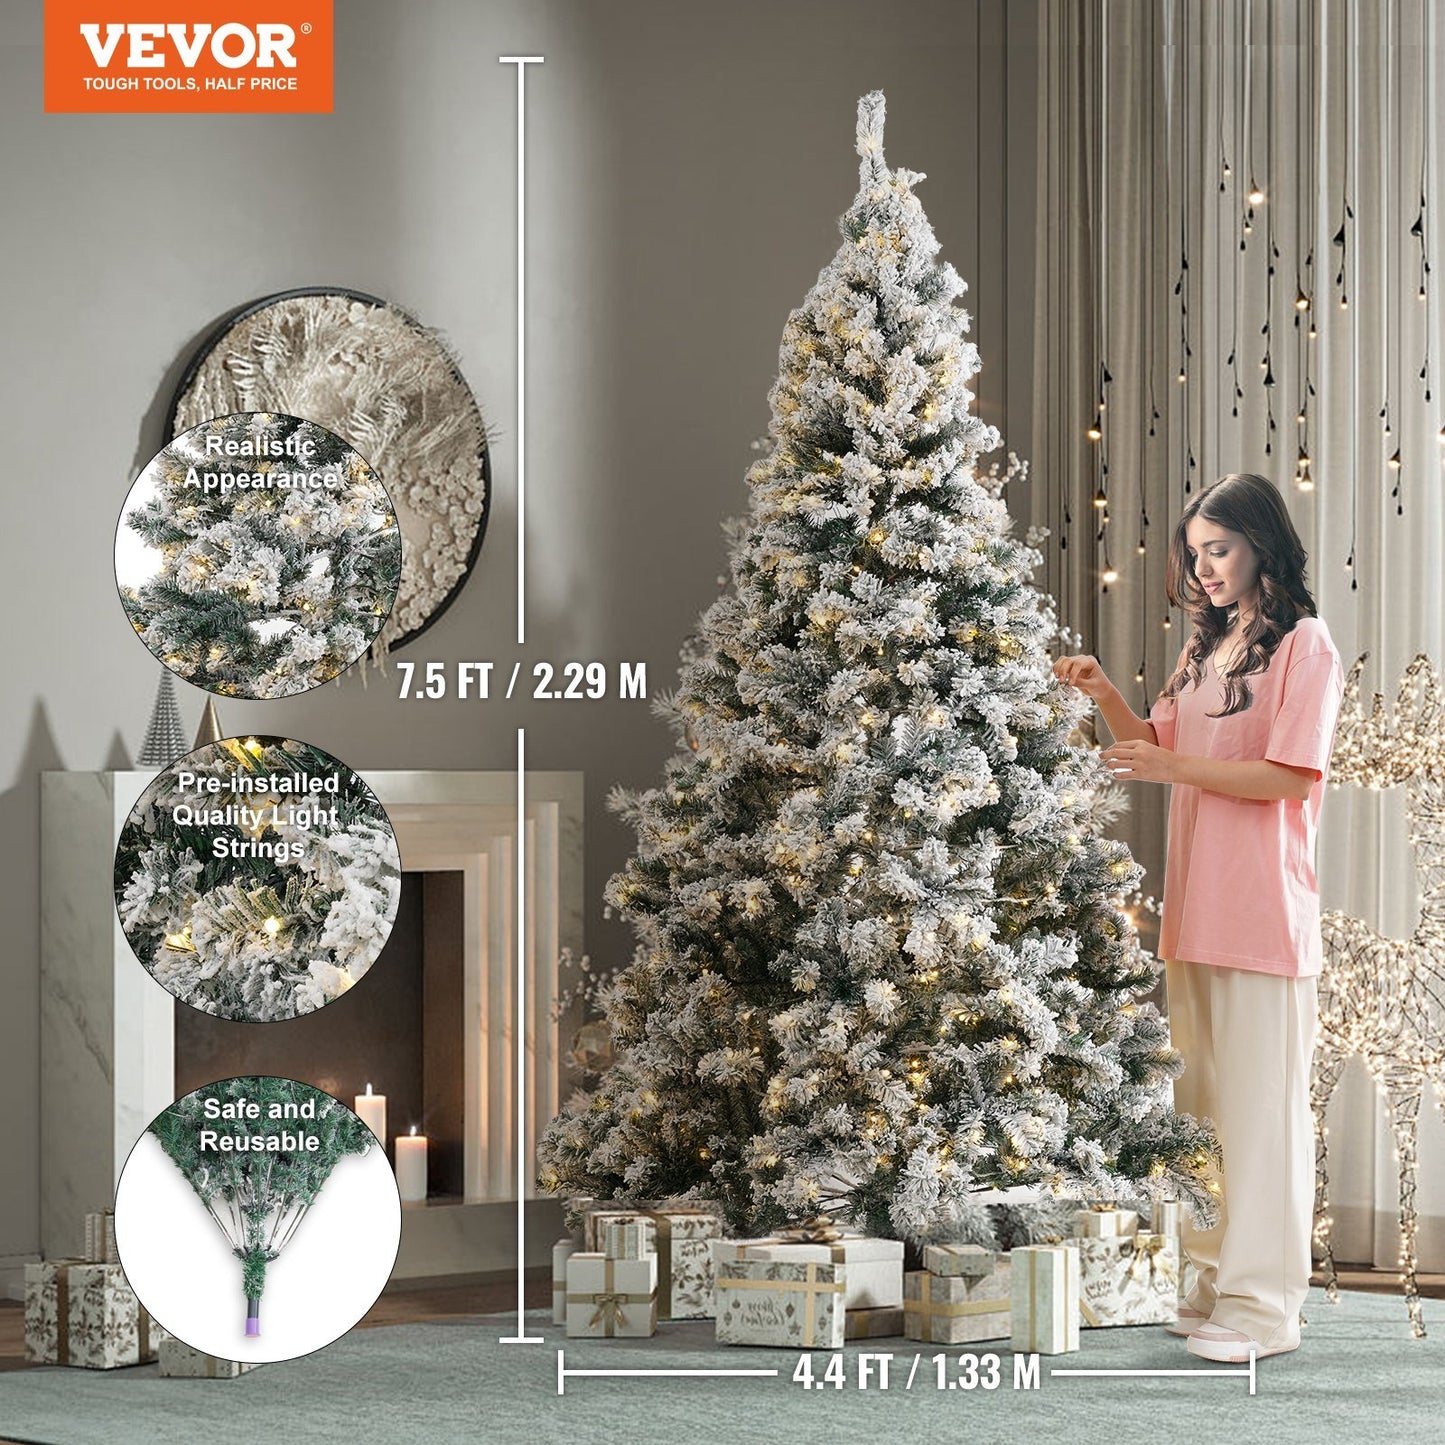 VEVOR Christmas Tree, Full Holiday Xmas Tree with LED Lights, Metal Base for Home Party Office Decoration